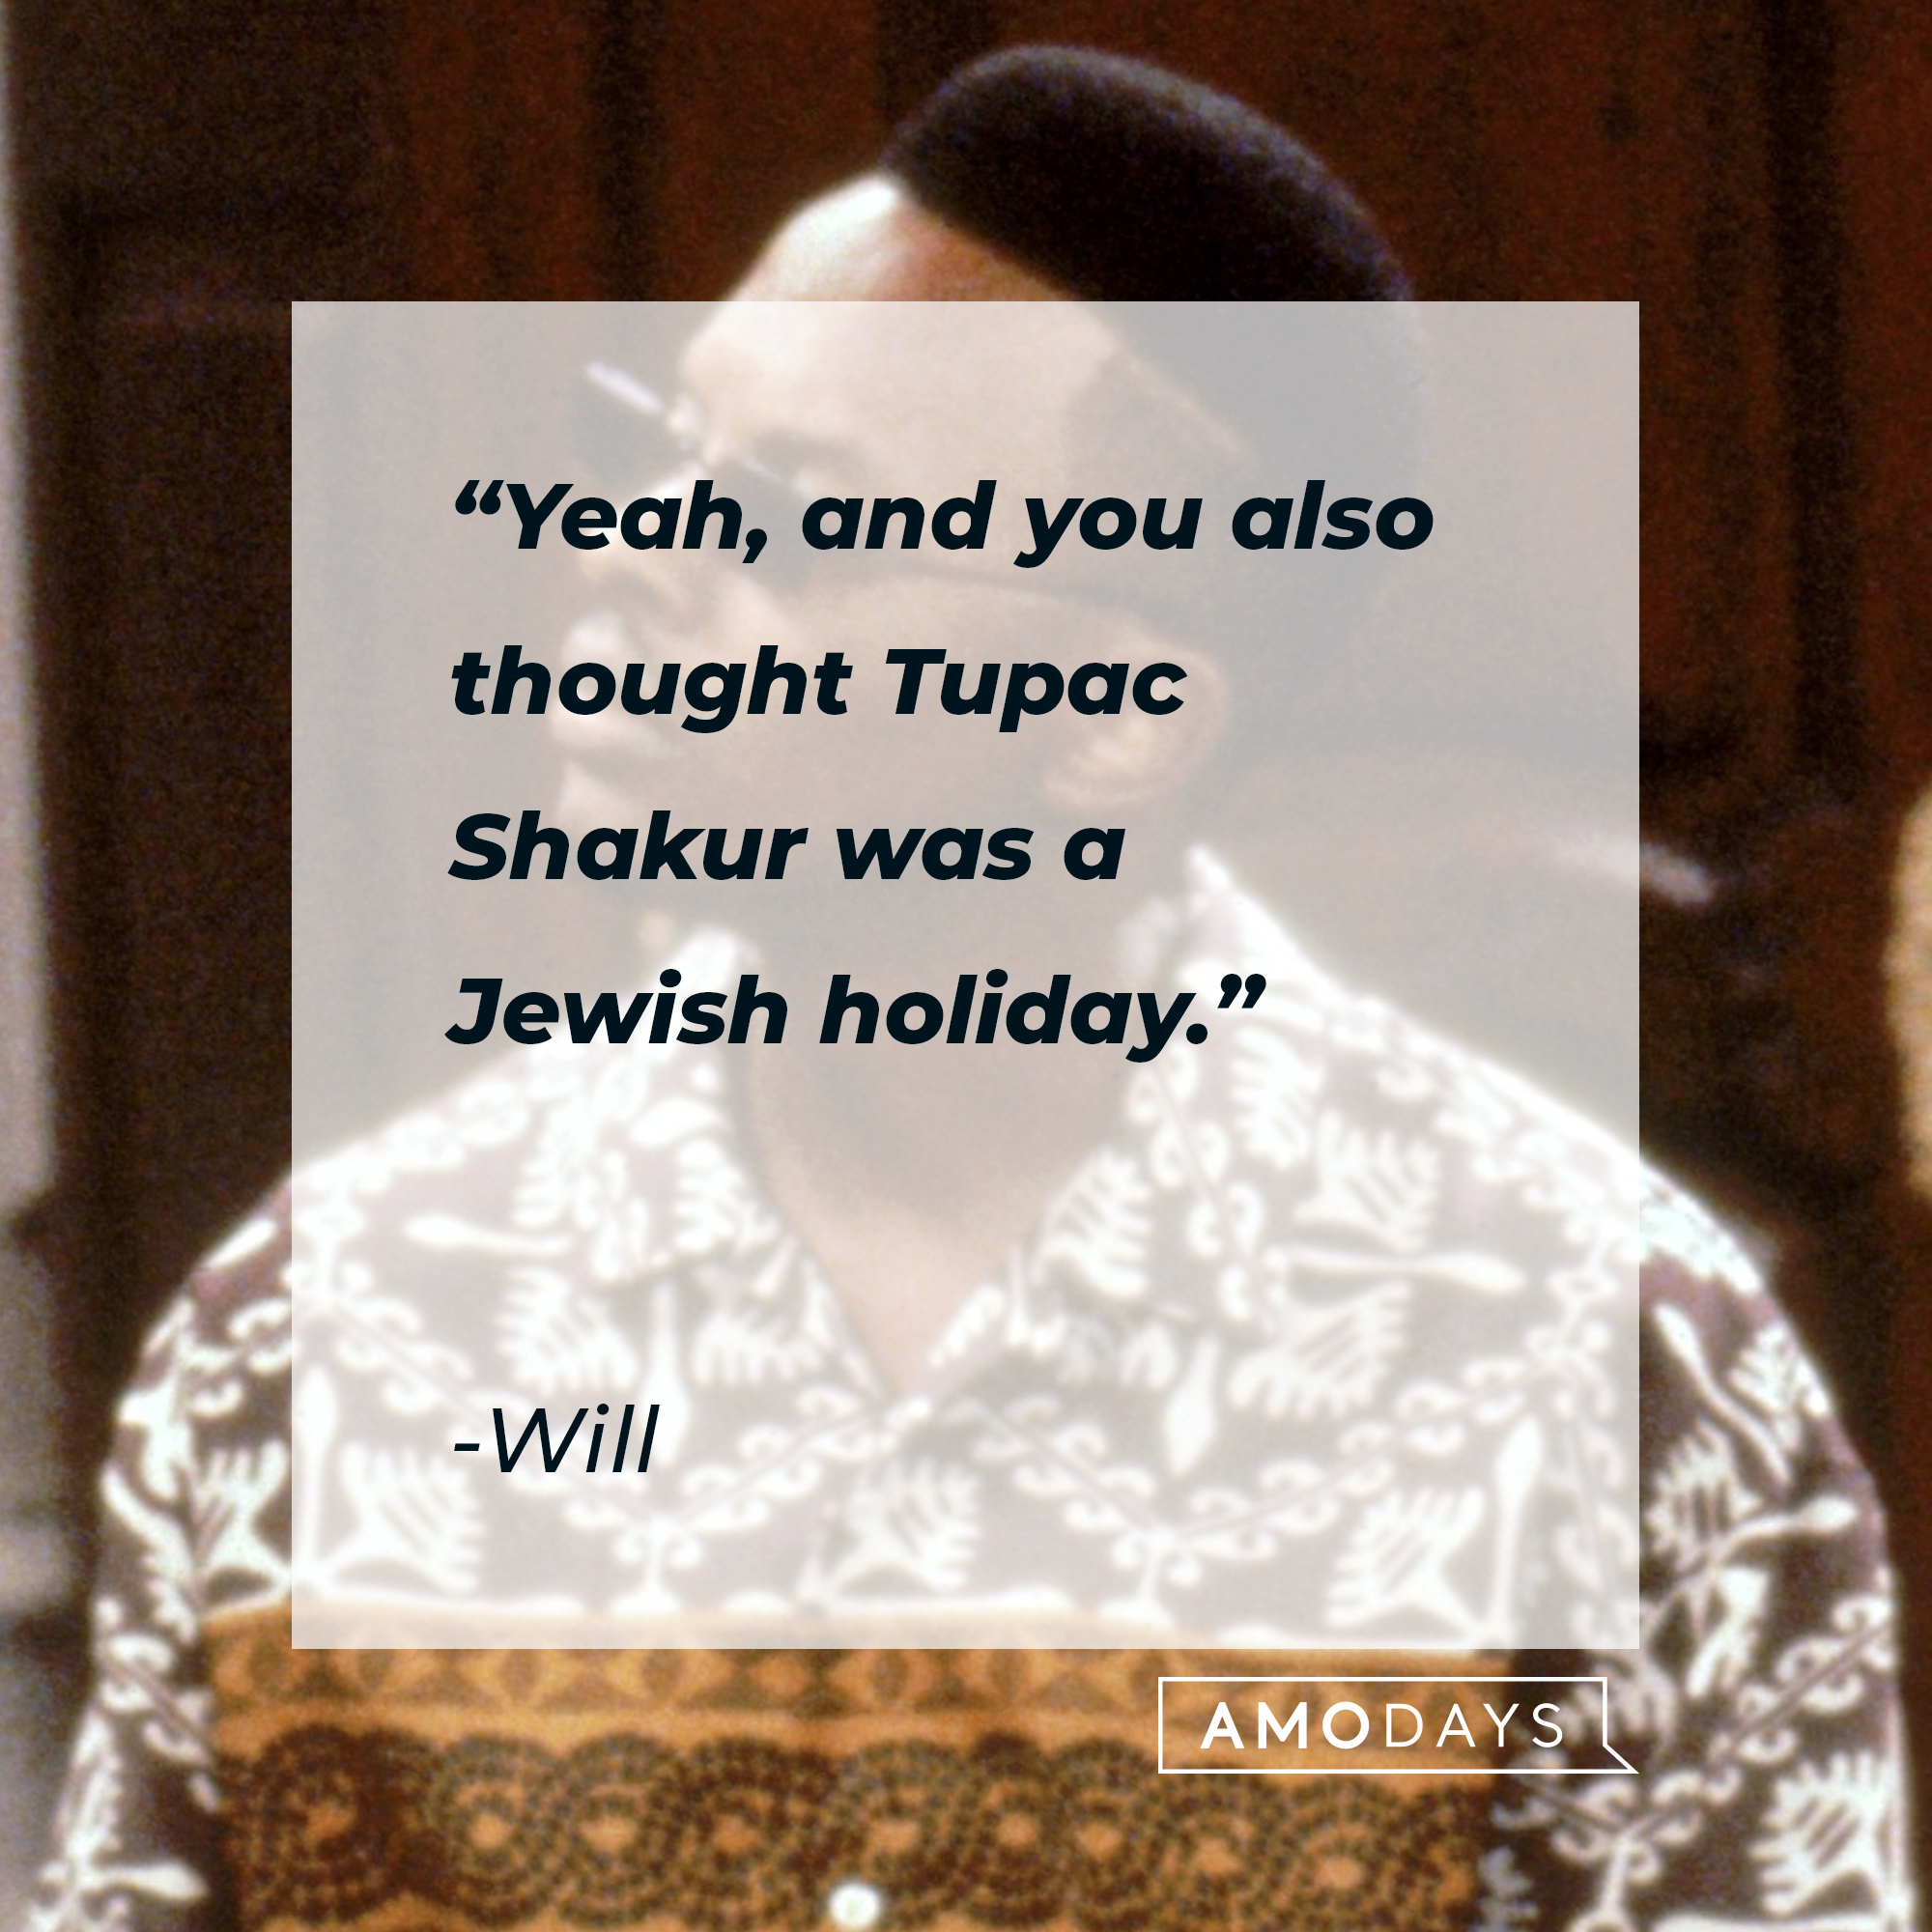 A picture of a character from “The Fresh Prince of Bel-Air” with Will’s quote: "Yeah, and you also thought Tupac Shakur was a Jewish holiday." | Source: facebook.com/TheFreshPrinceofBelAir